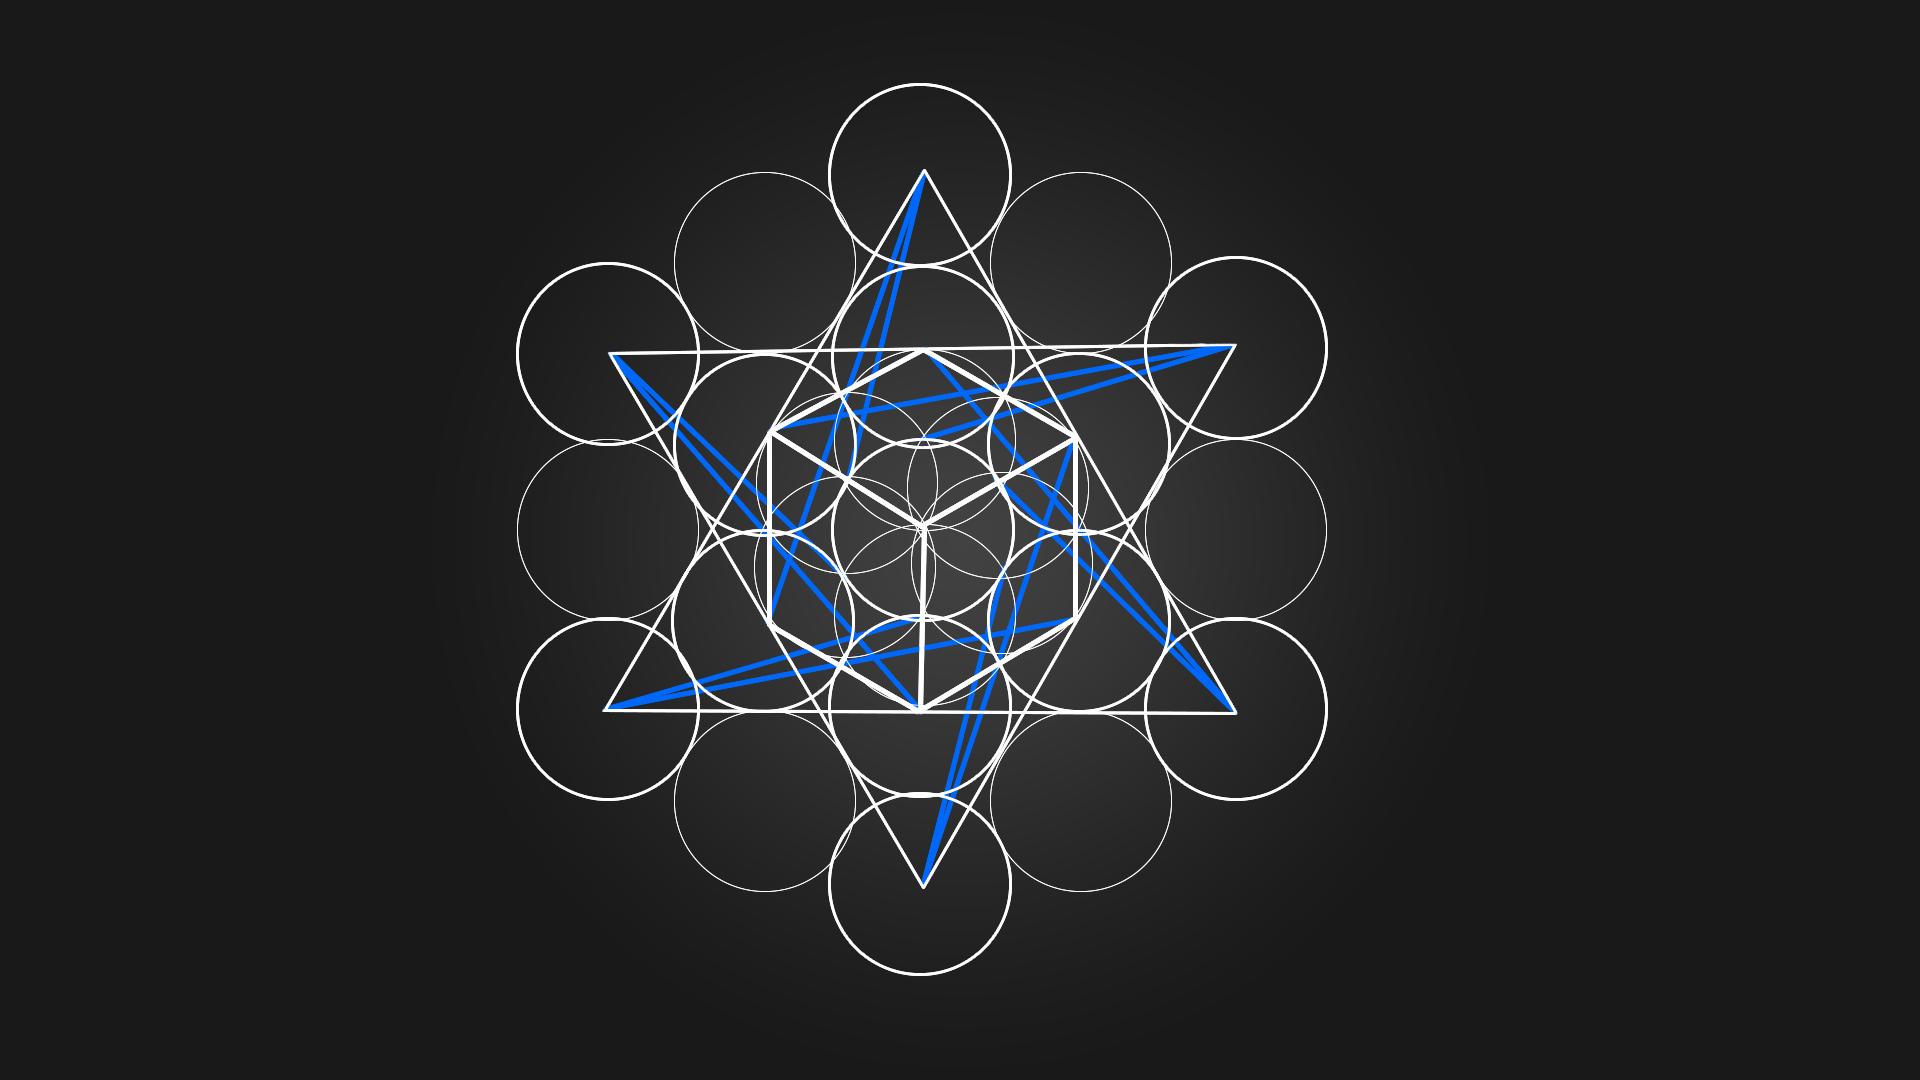 Metatron Cube Wallpaper I Made From The My Friend Found